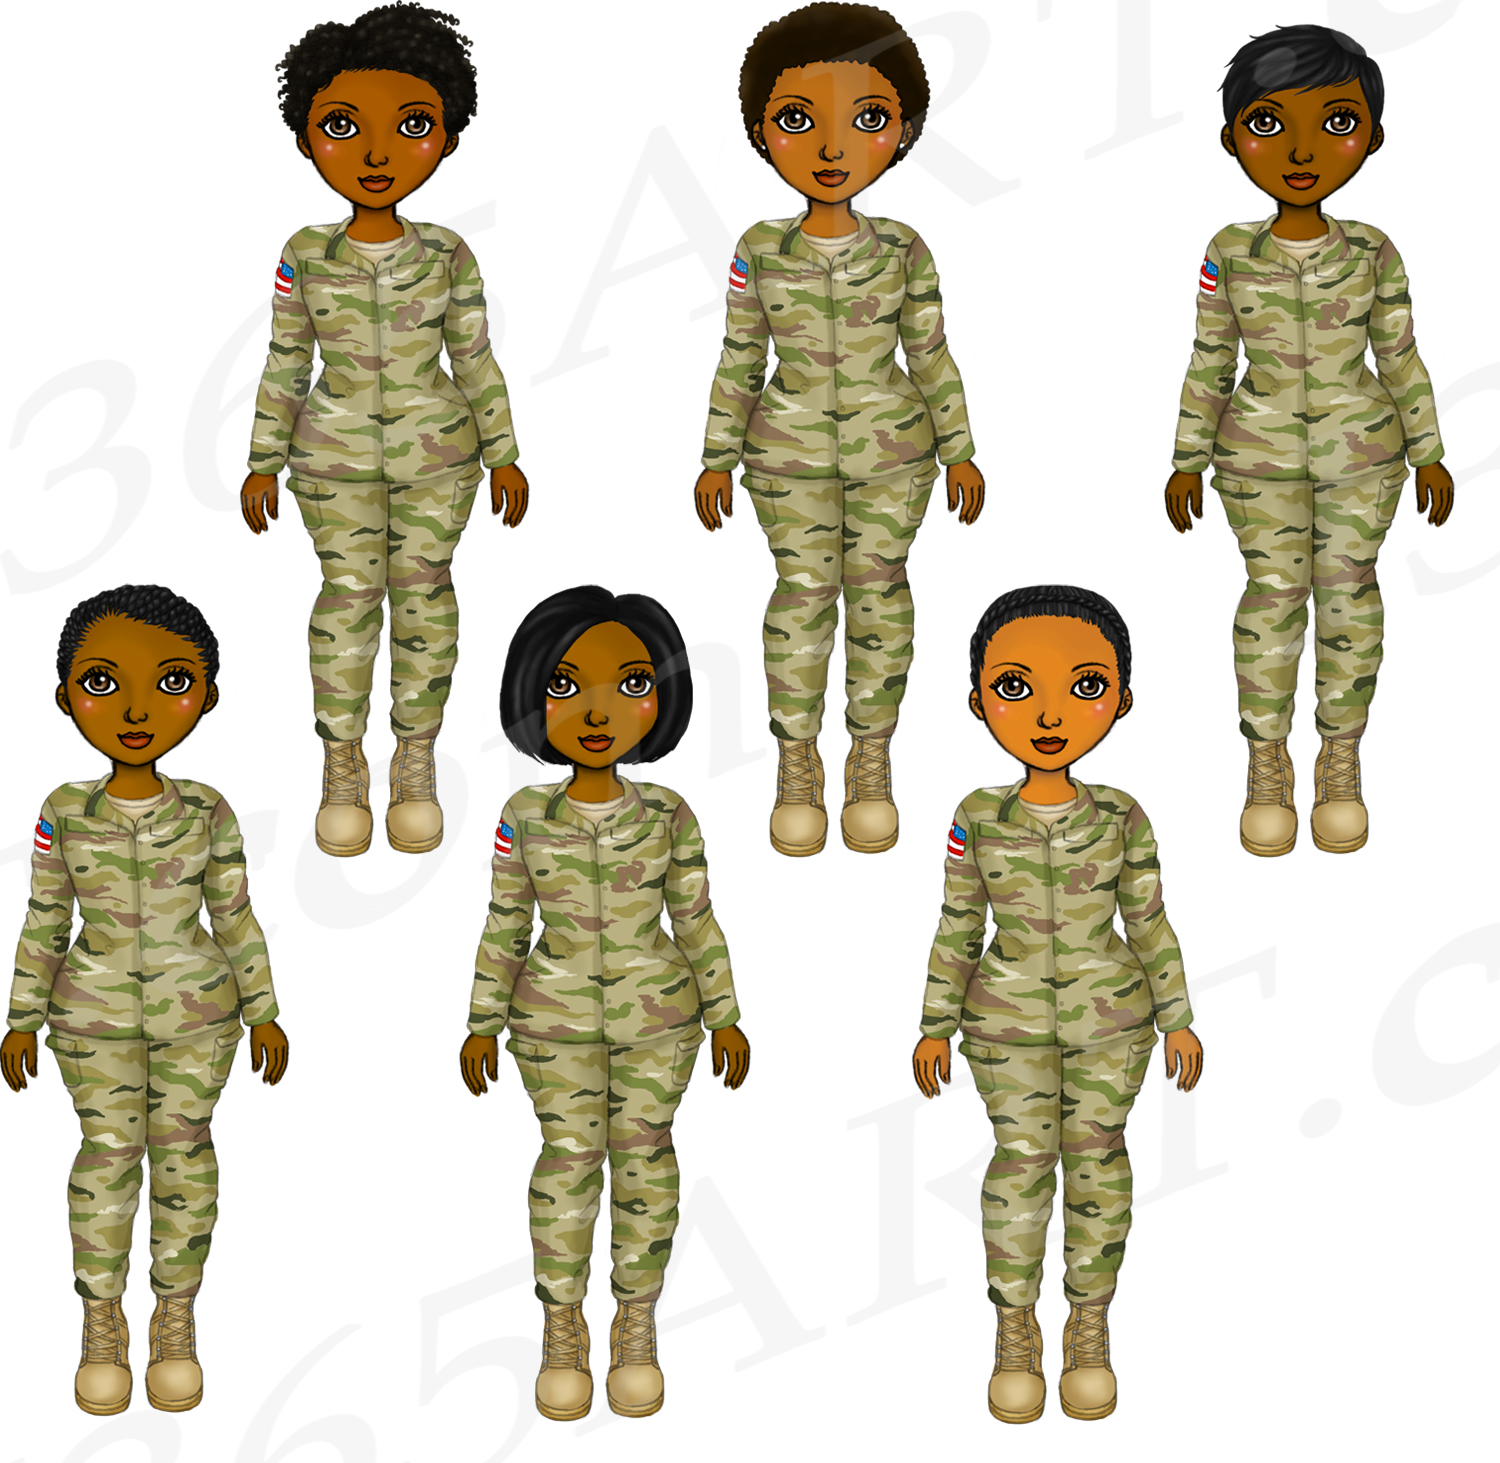 Soldier Cliparts, Stock Vector and Royalty Free Soldier Illustrations